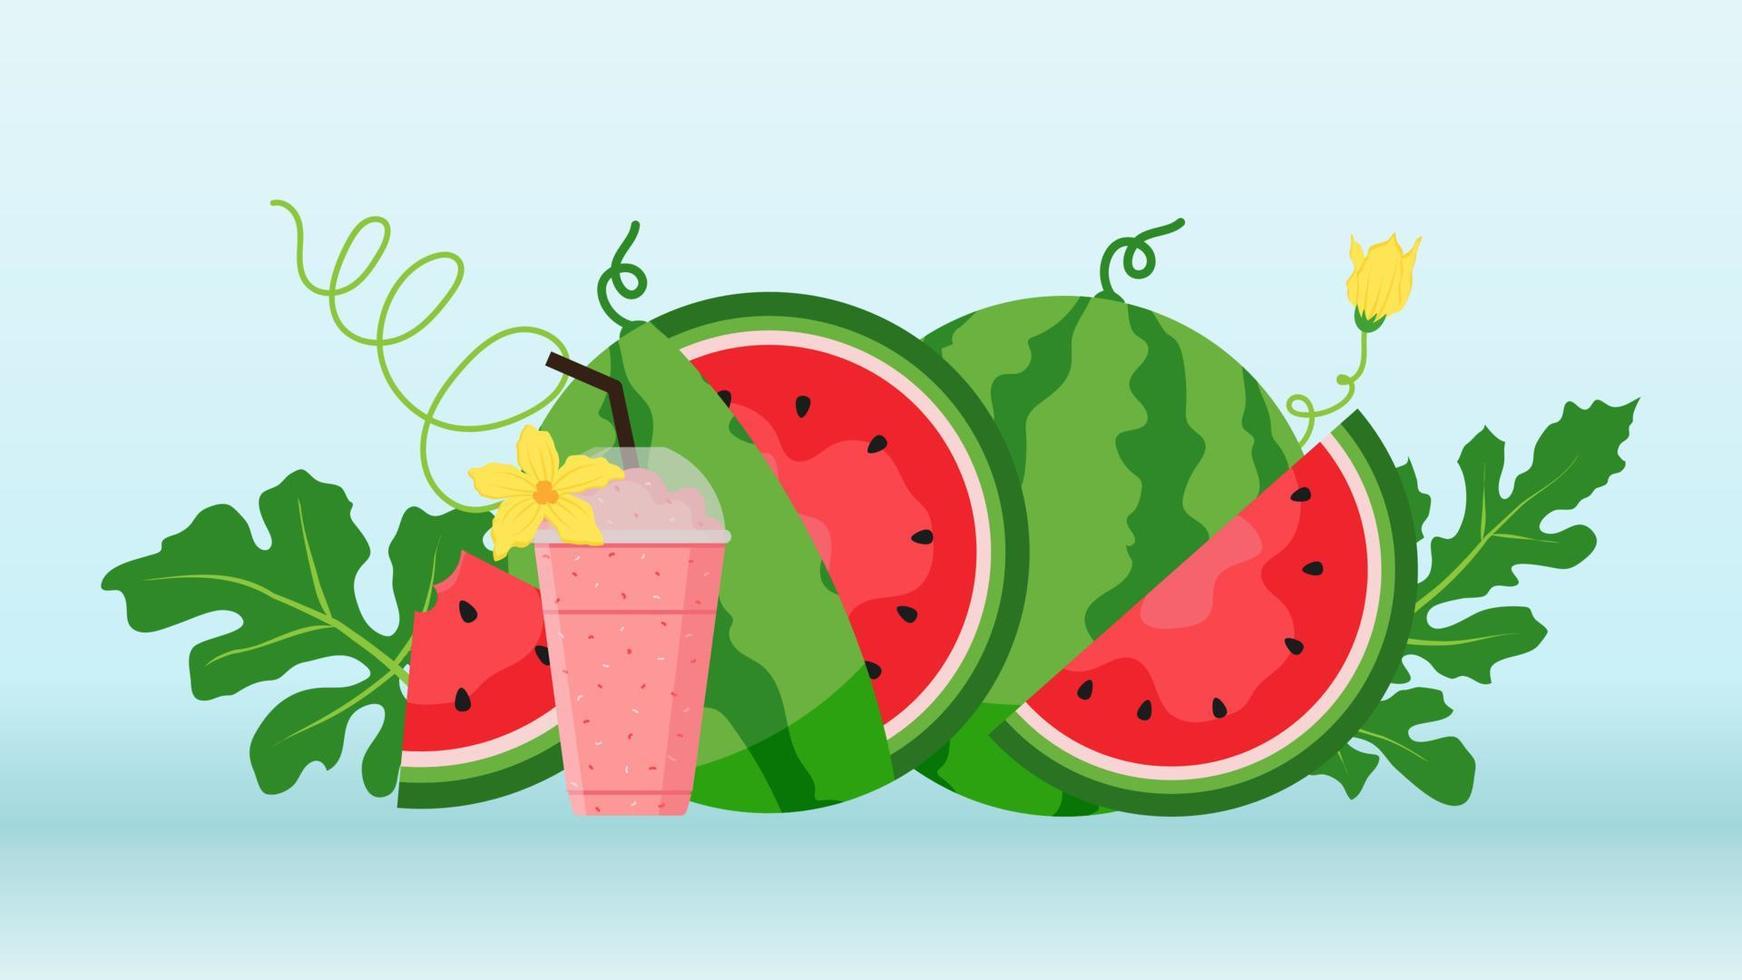 Watermelon and juicy slices banner, flat design of green leaves and watermelon flower illustration, Fresh and juicy fruit concept of summer food. vector